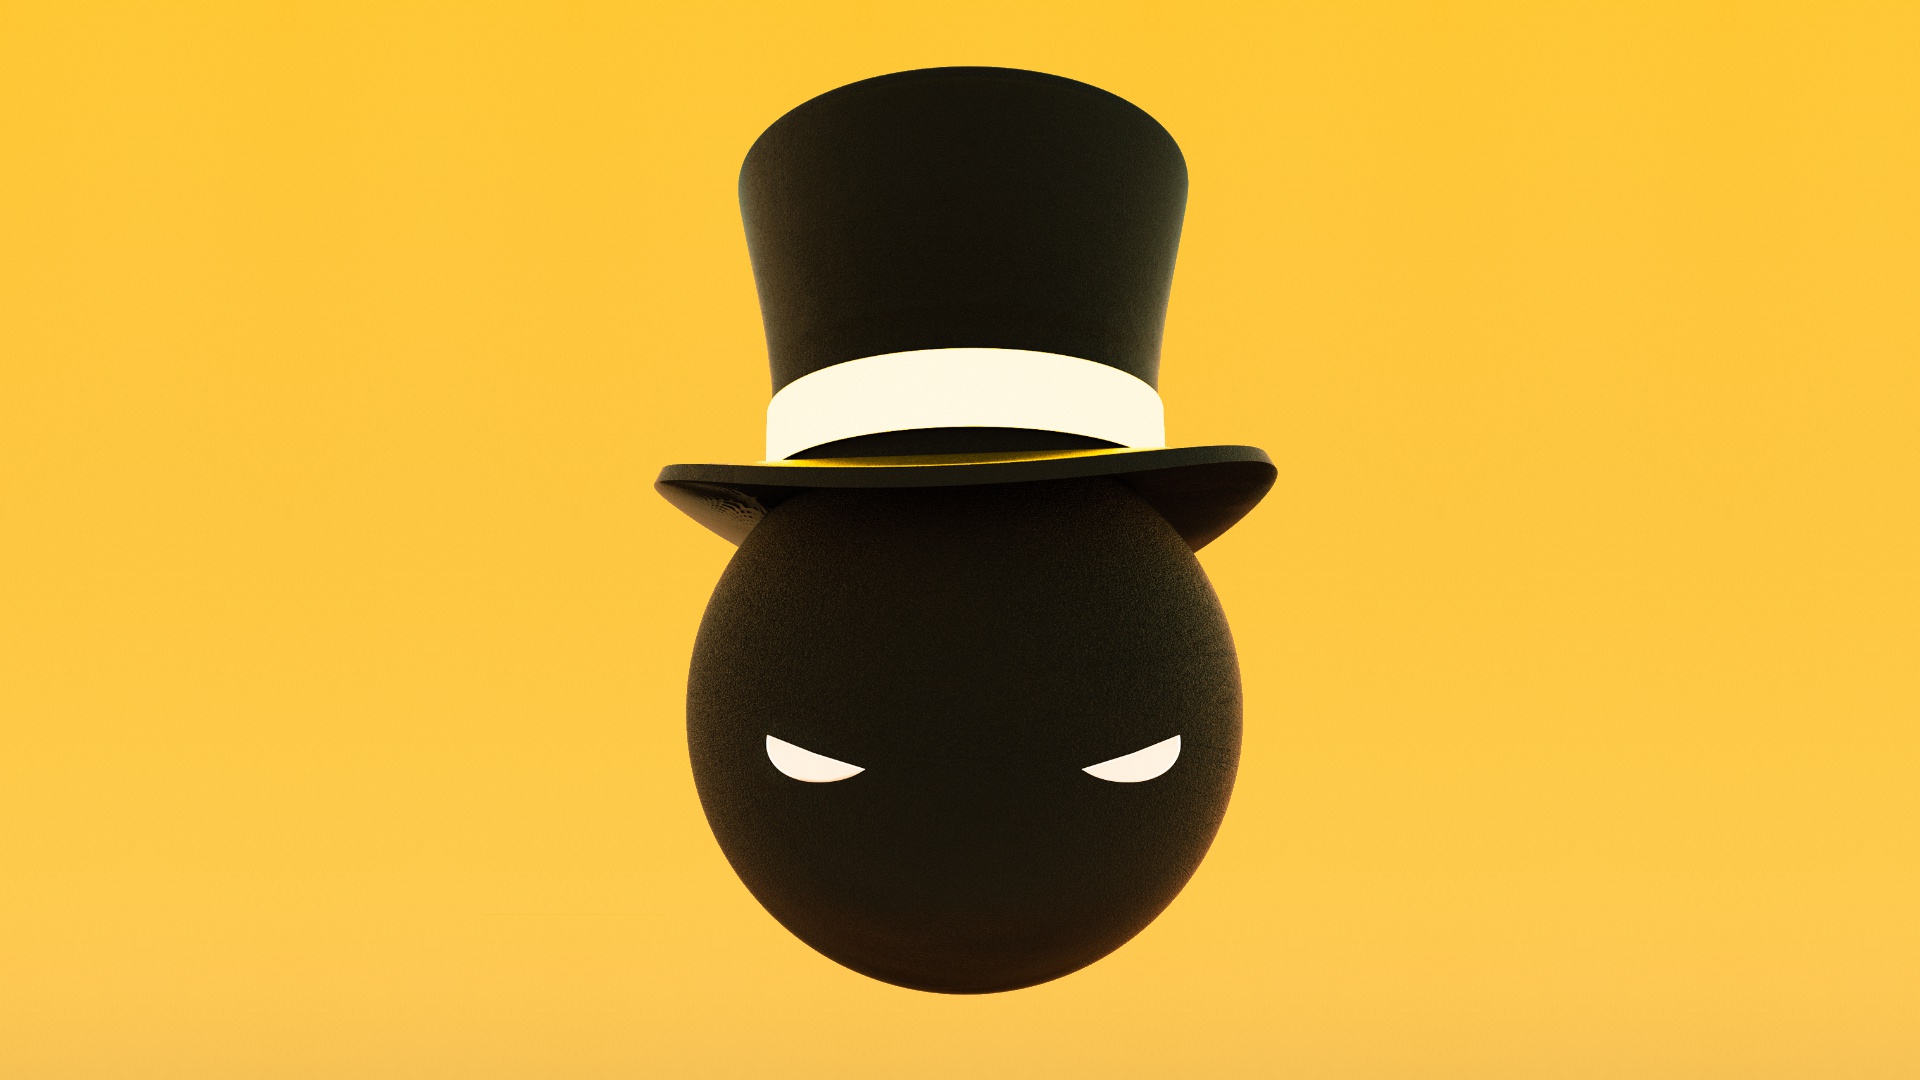 General 1920x1080 ball eyes simple background yellow background top hat